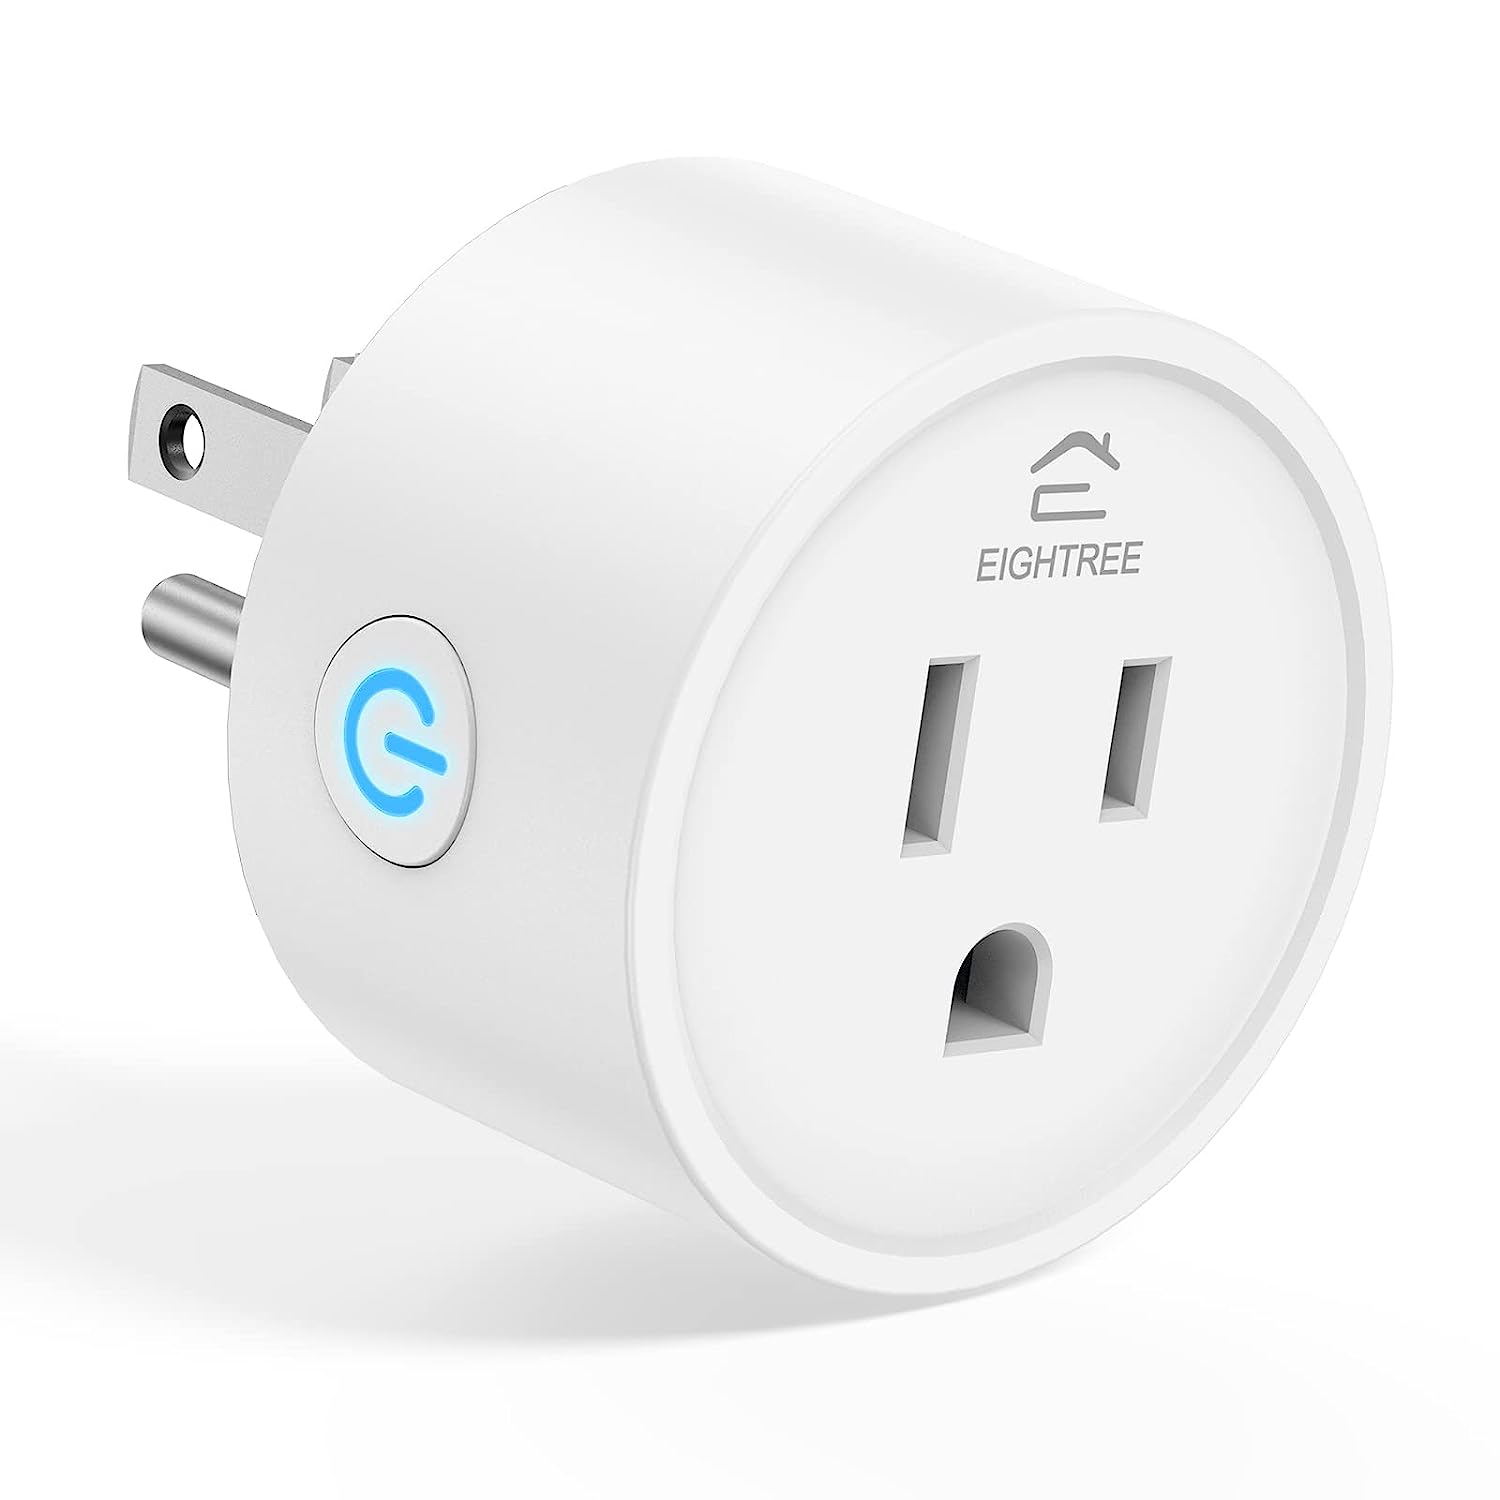 Smart Plug EIGHTREE, Alexa Smart Plugs That Assignment with Alexa and Google Home, Compatible with SmartThings, Smart Outlet with WiFi Remote Control and Timer Function, 2.4GHz Wi-Fi Only, 4Packs